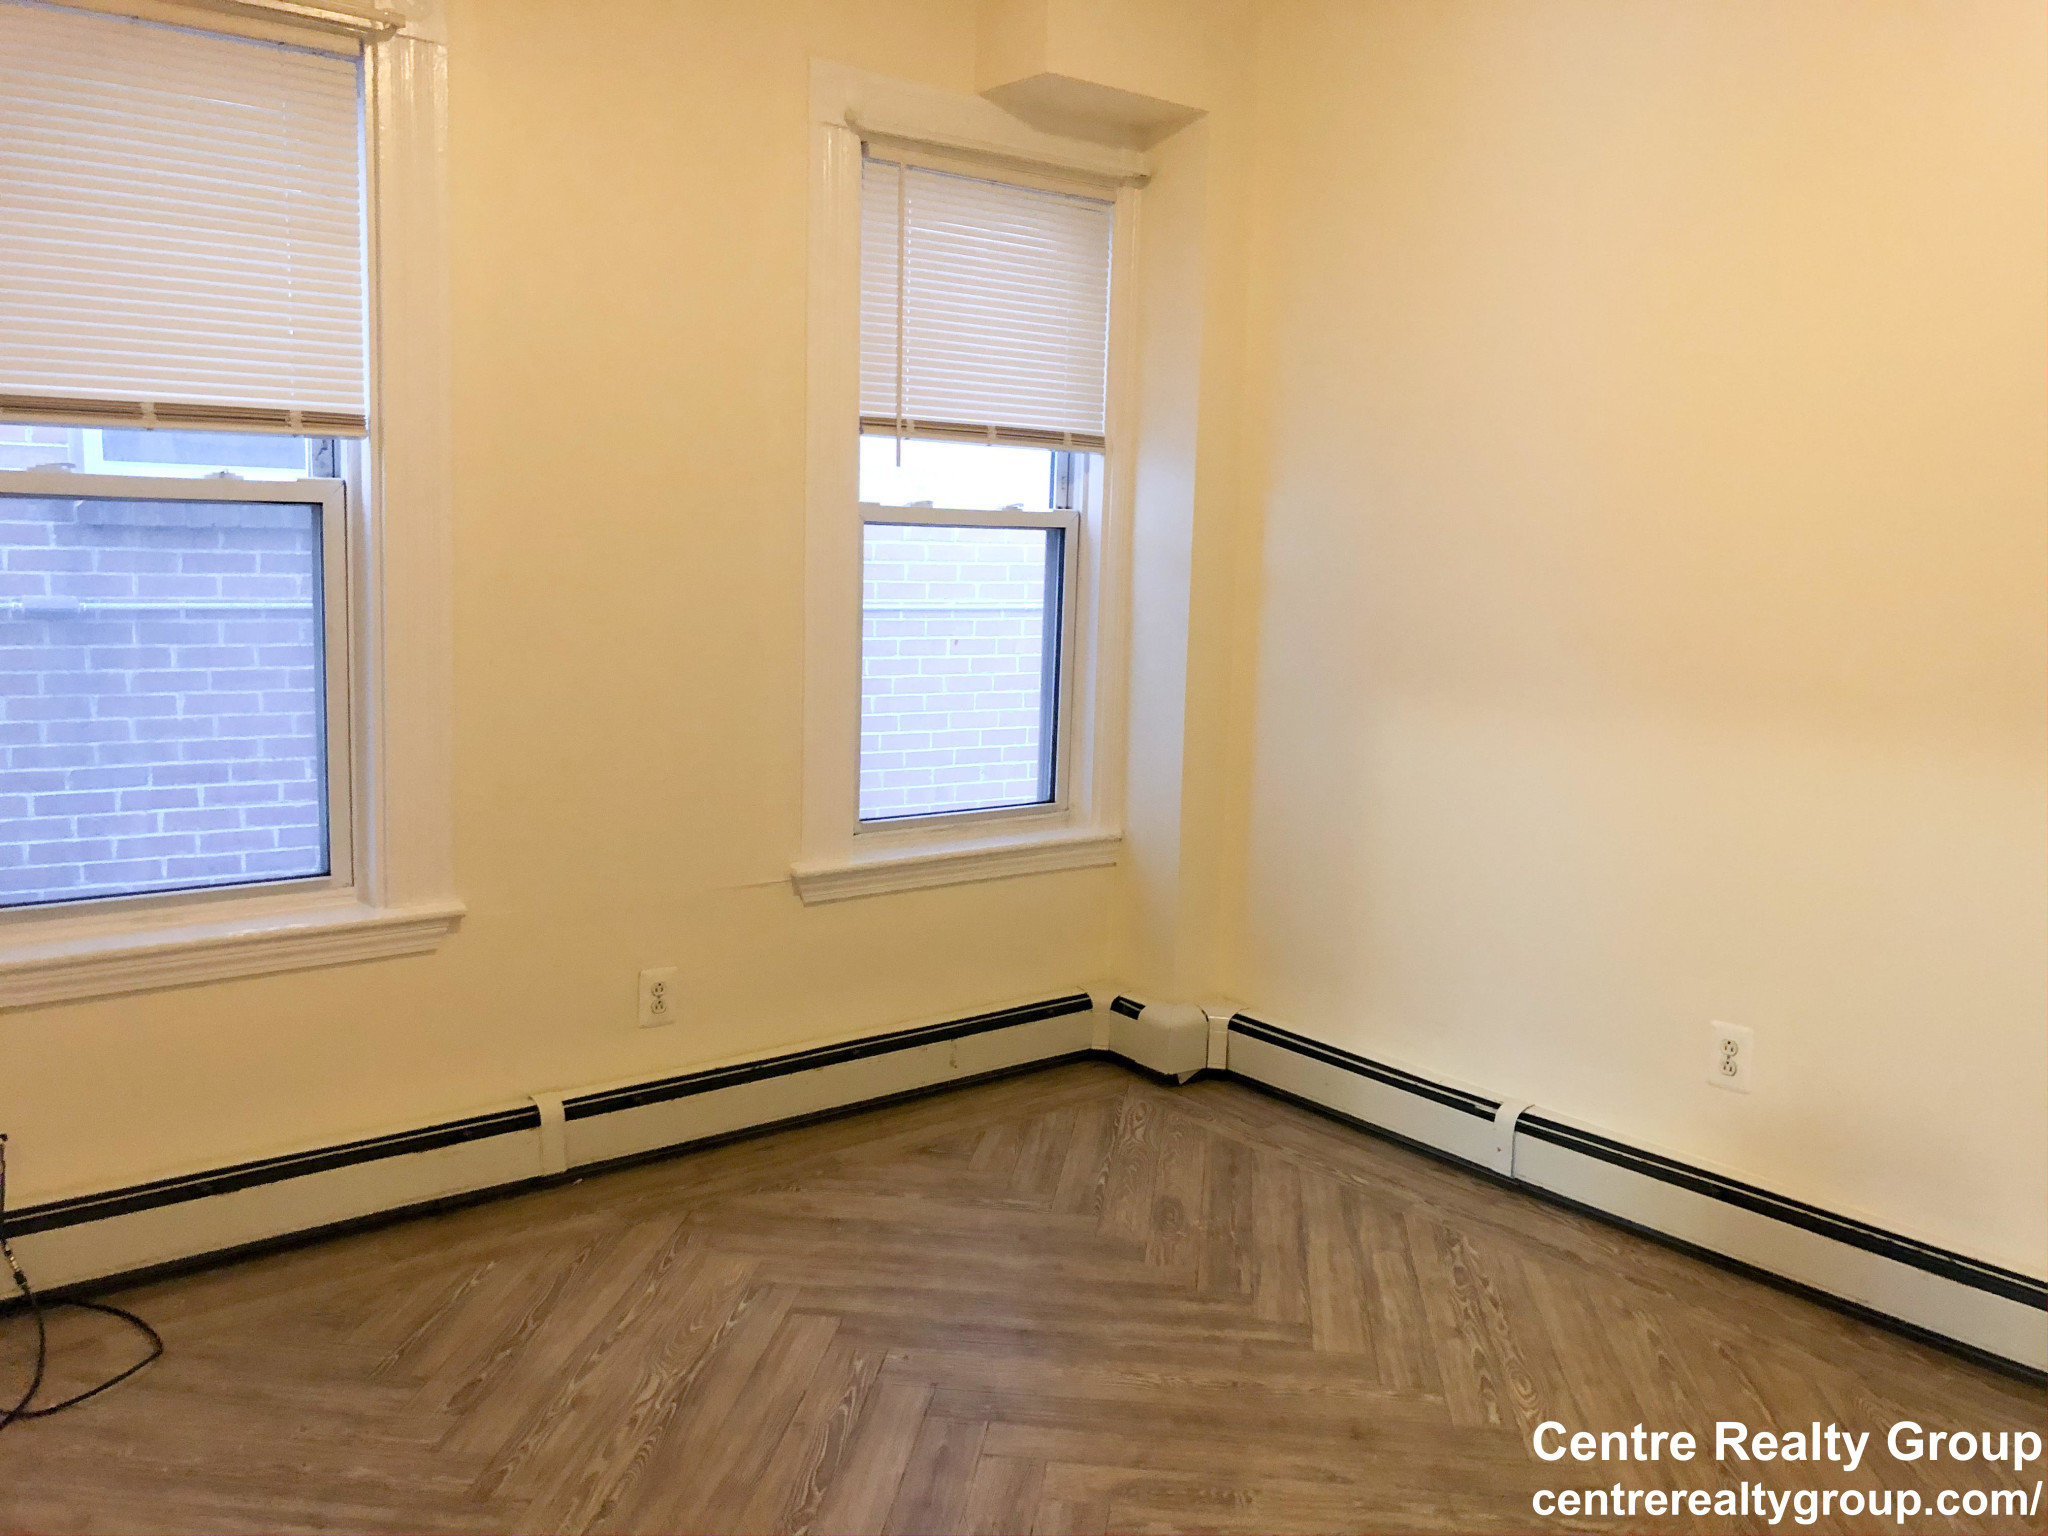 Photos of apartment on George St.,Somerville MA 02145